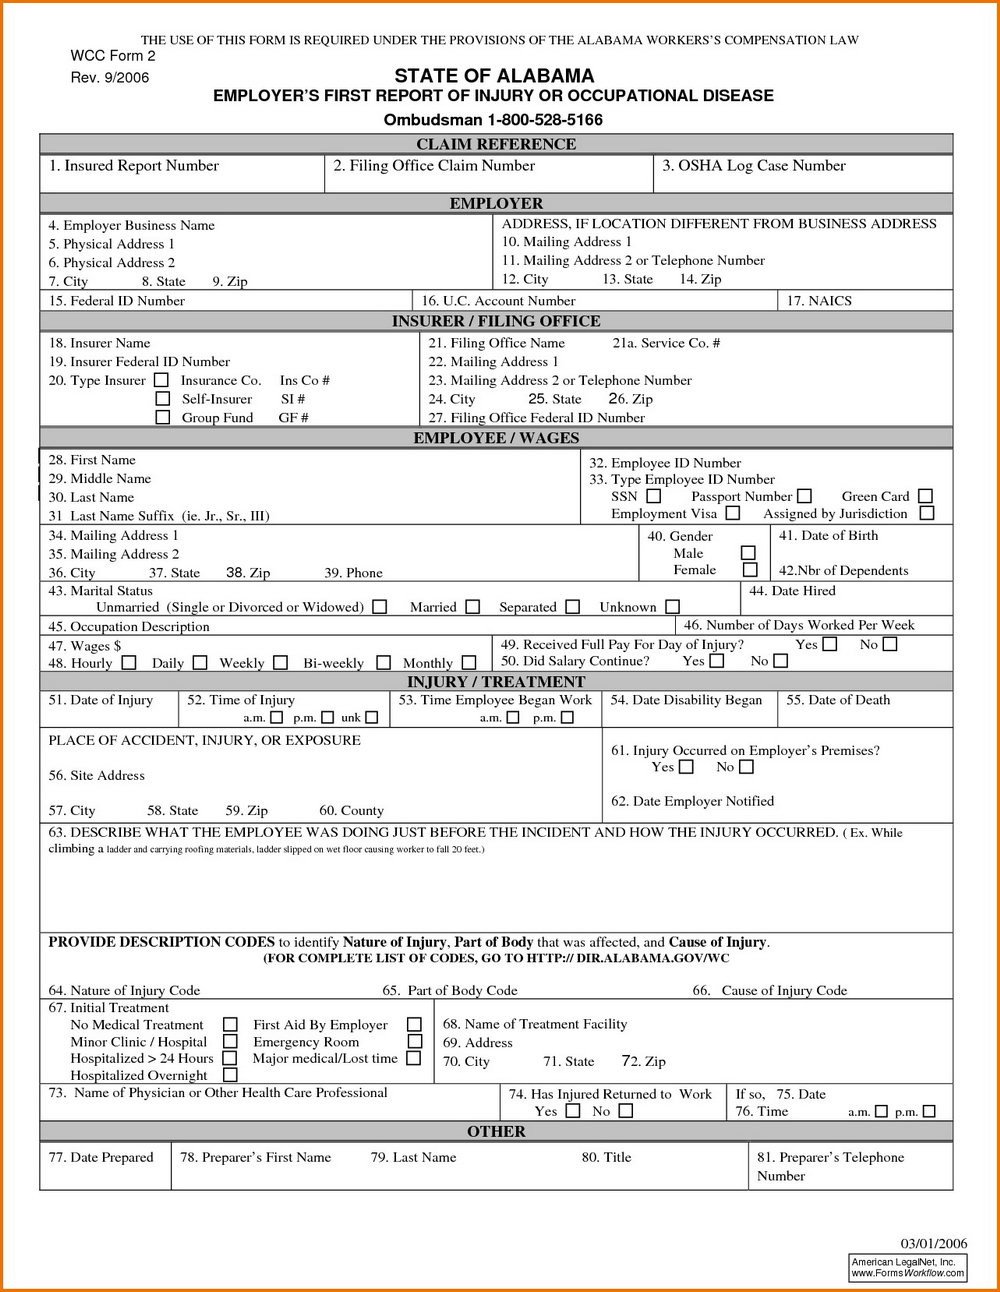 Fake Std Papers Fake Std Test Results form forms 6993